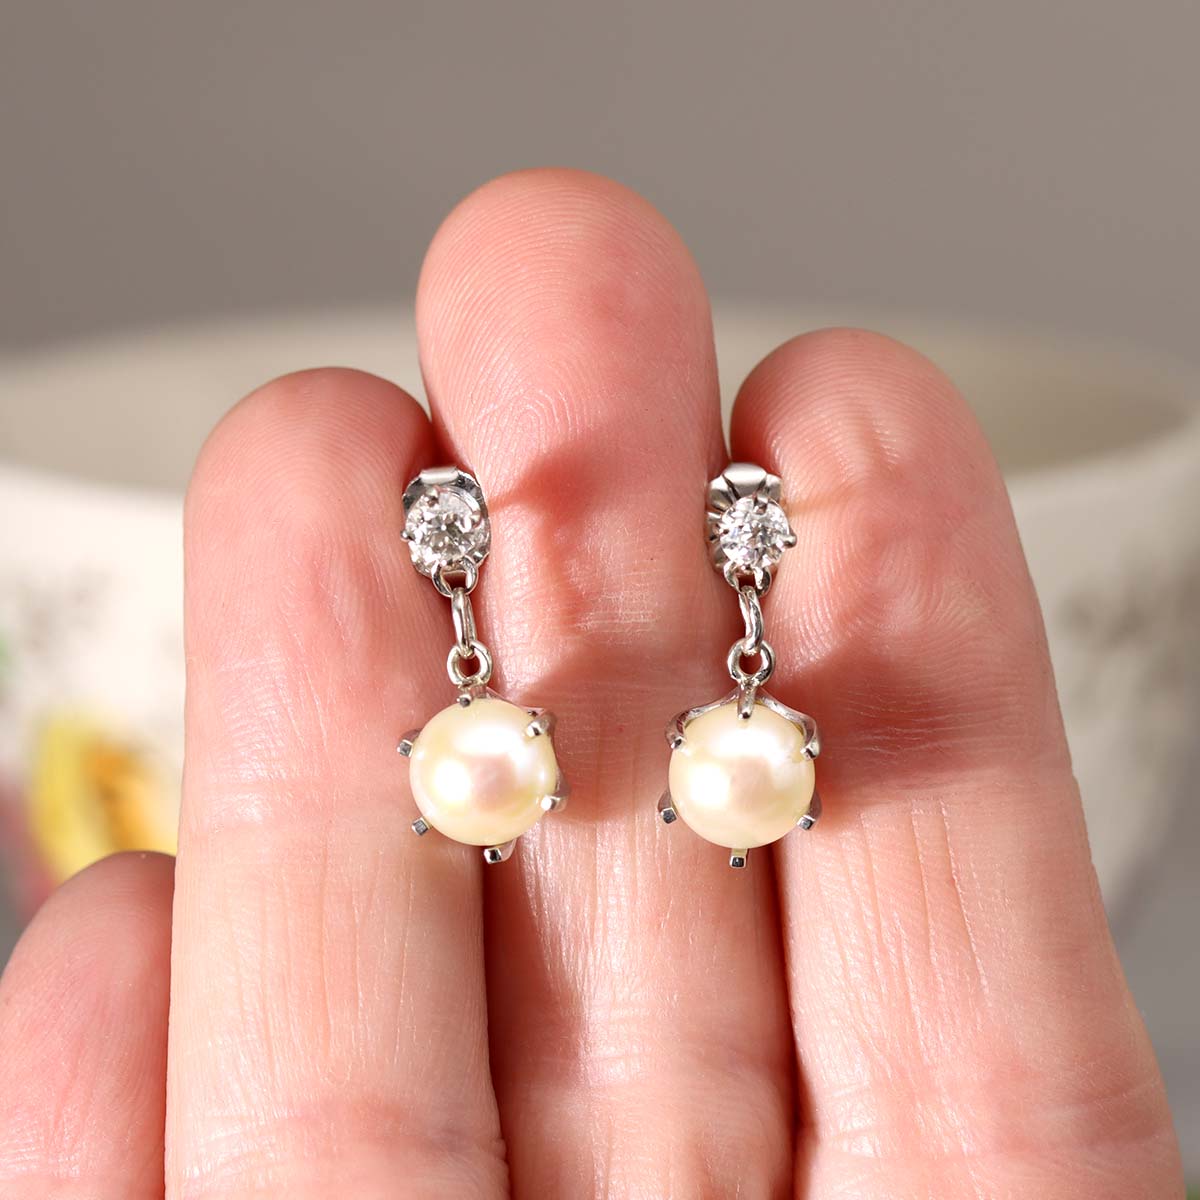 Late Art Déco Diamond and Pearl Earrings #VE566-06